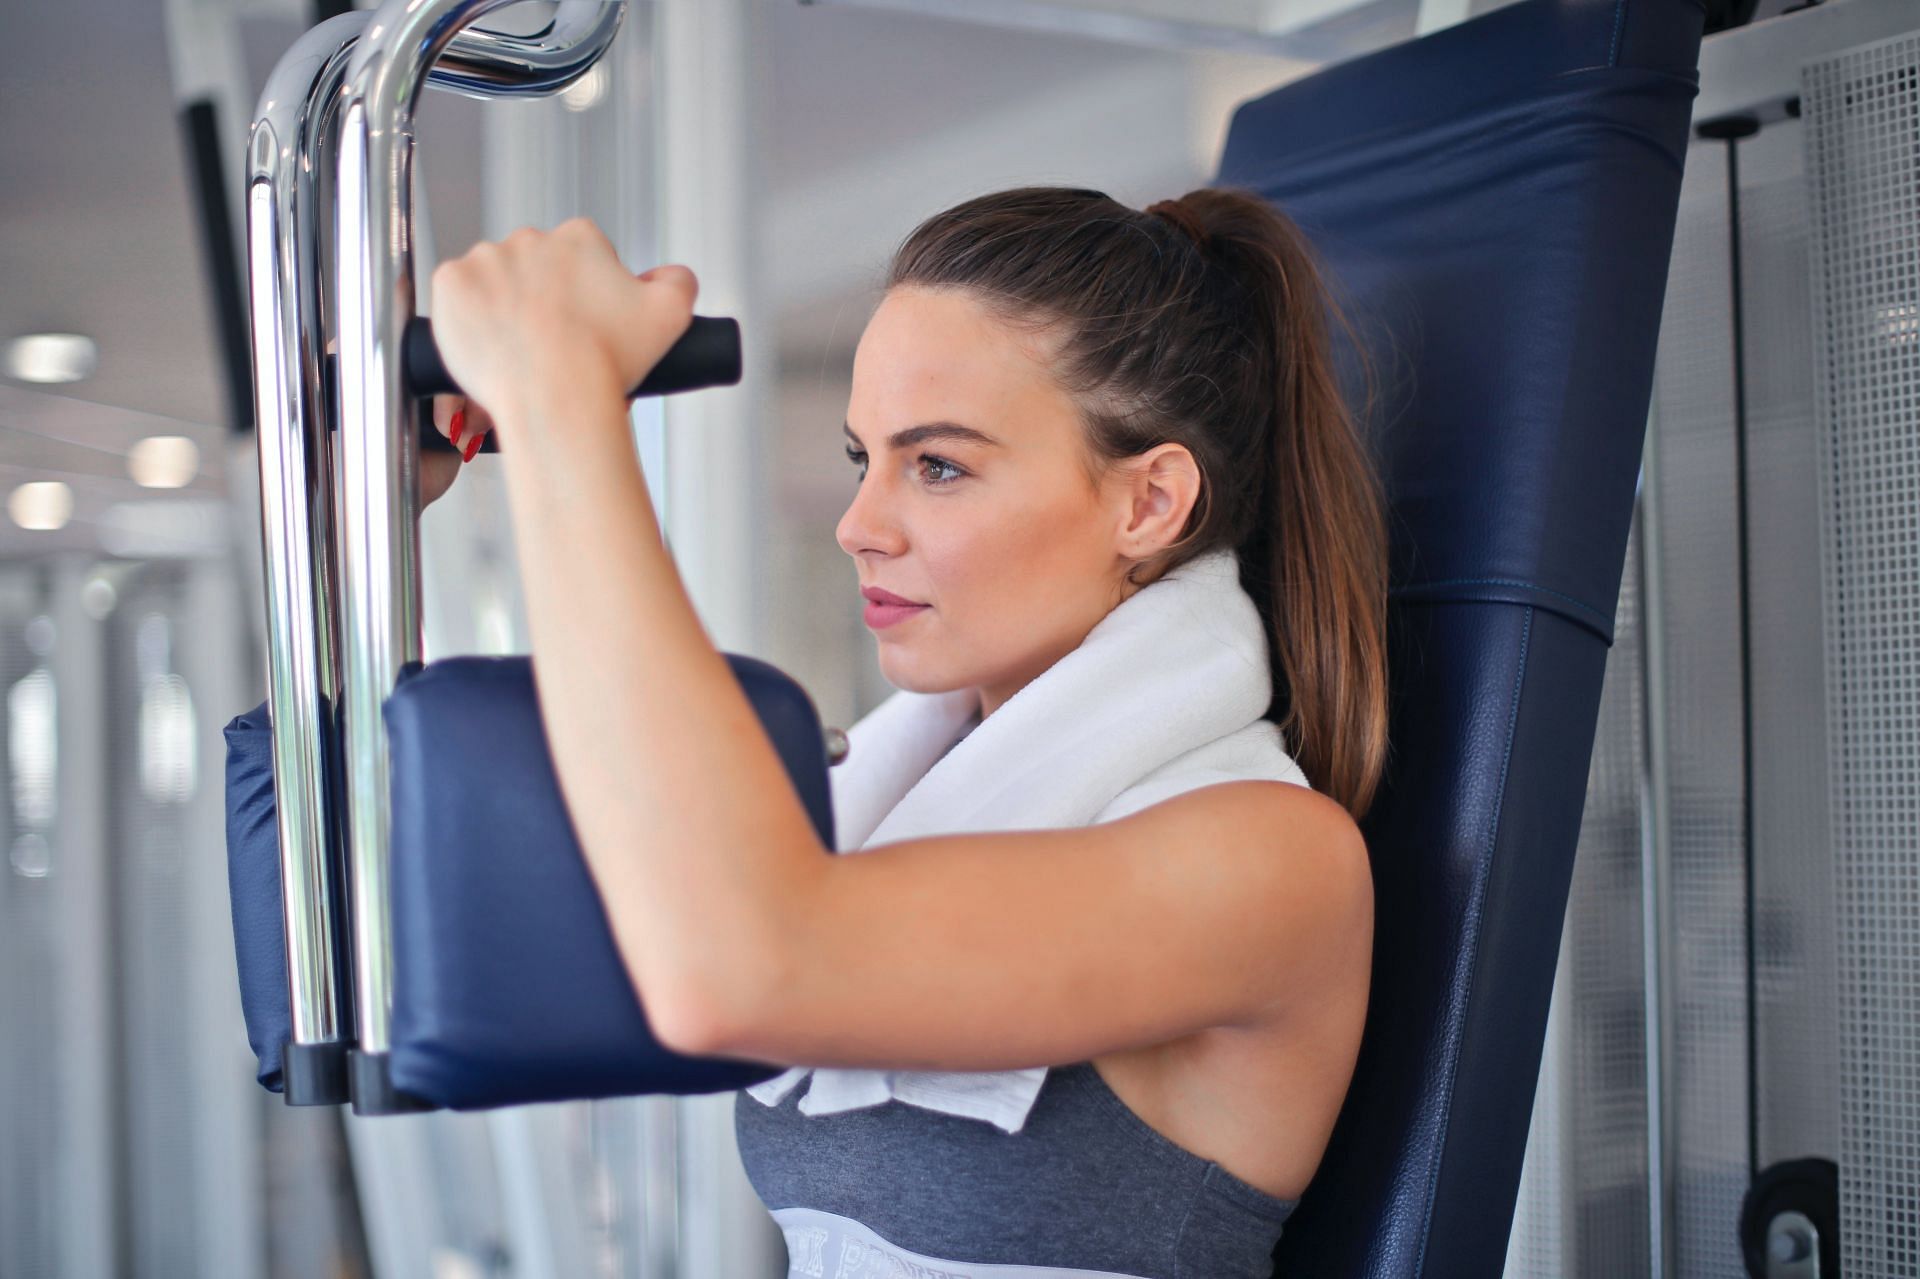 Forearm exercise equipment to use (Image sourced via Pexels / Photo by Andrea)